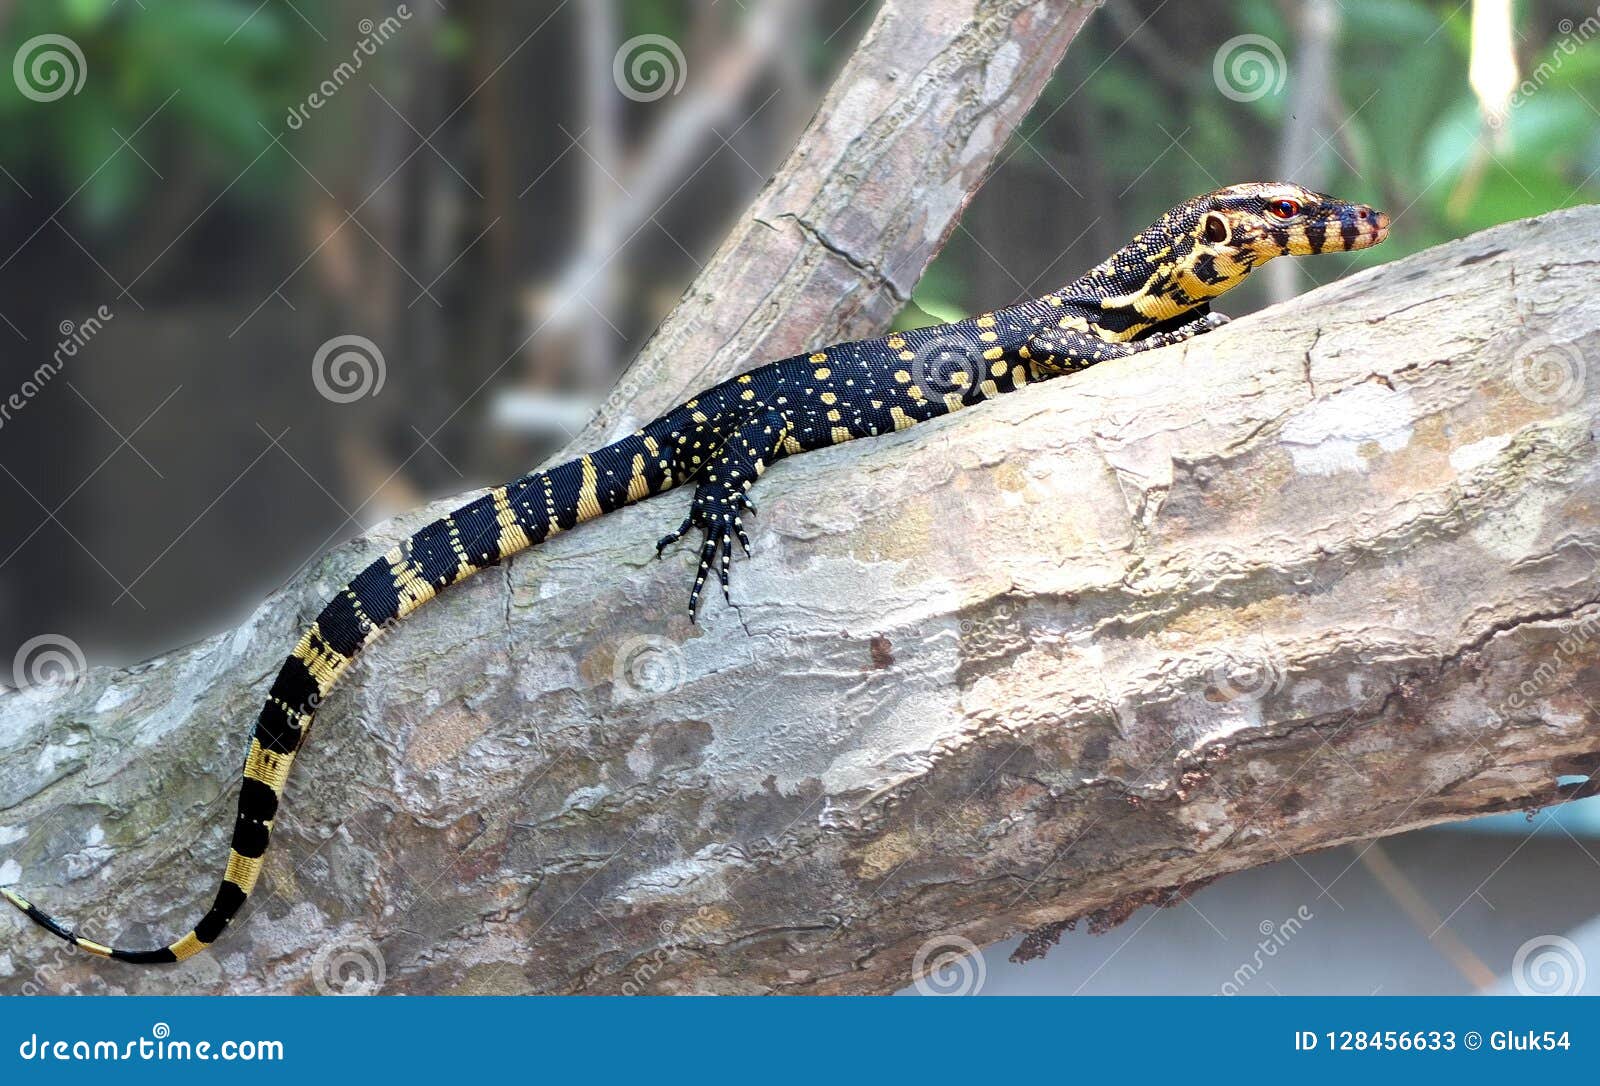 lizards are a widespread group of squamate reptiles